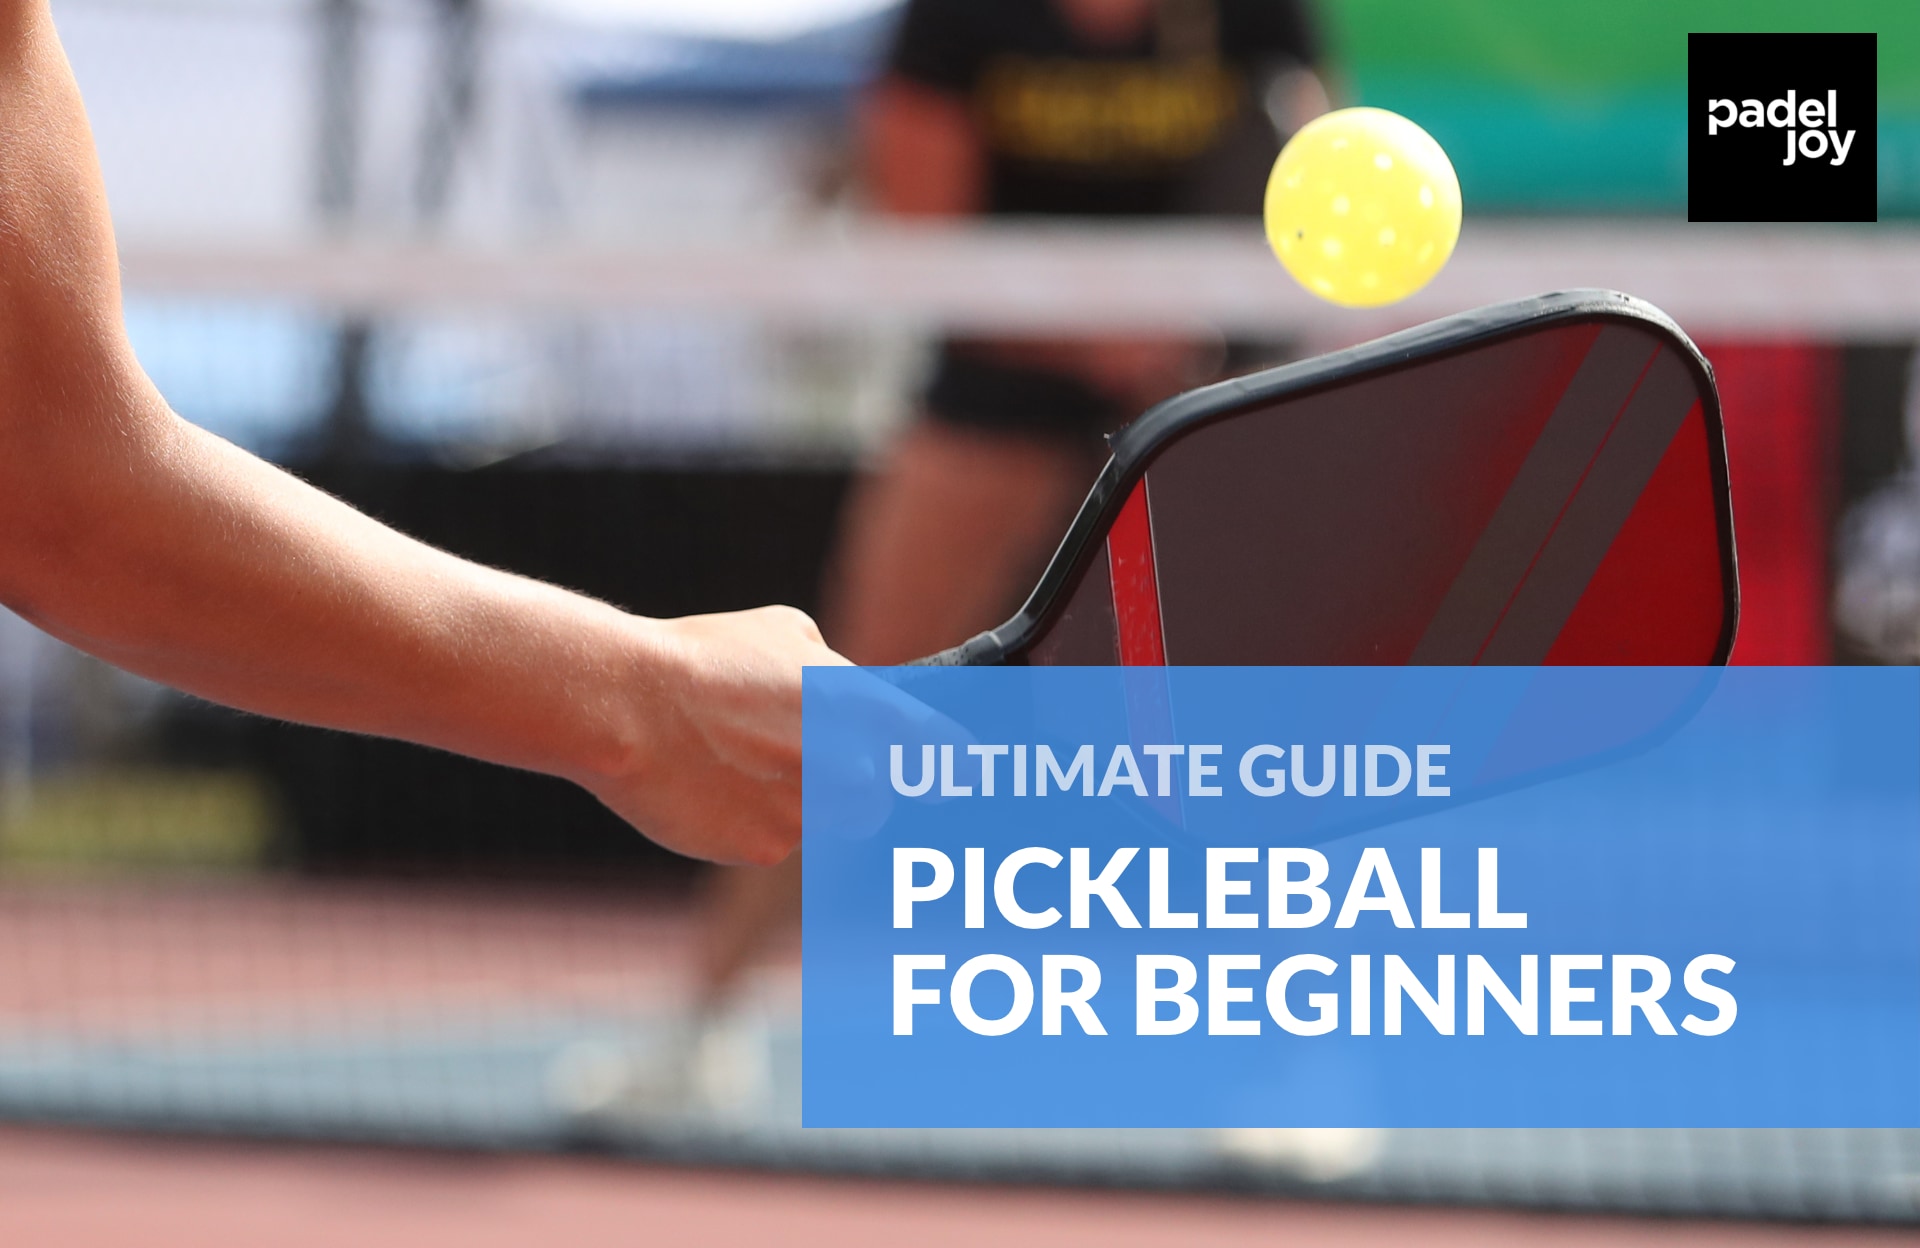 Pickleball for Beginners: How to Get Started (Ultimate Guide)